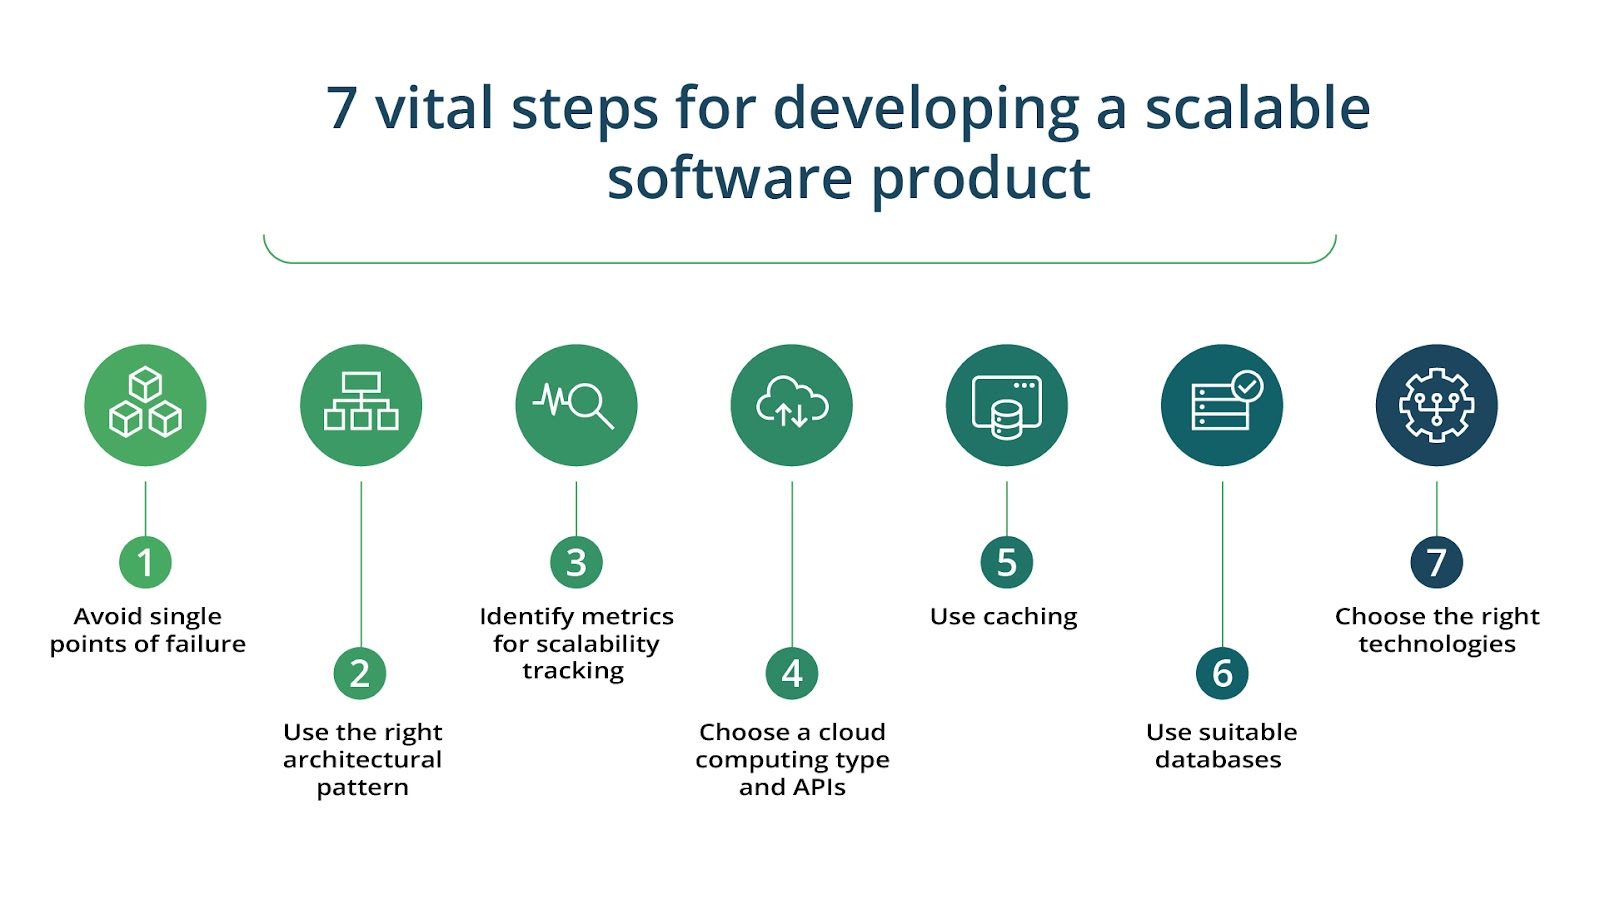 7 vital steps for developing a scalable software product